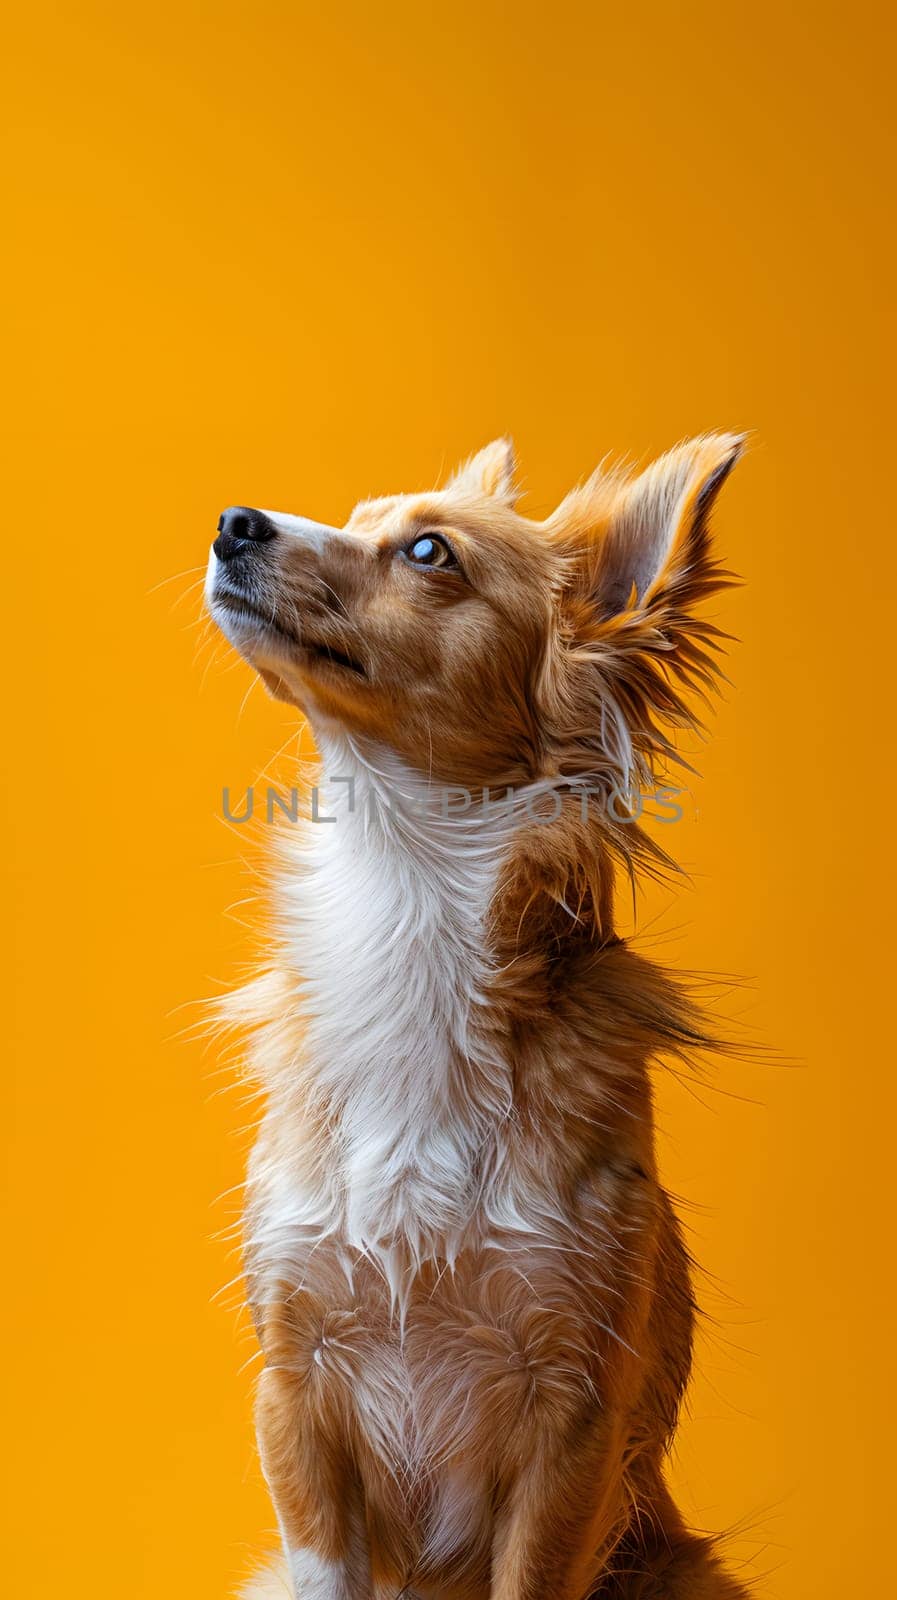 A fawncolored dog with white markings, likely a mixed breed companion dog, sits on a yellow background, gazing upwards with its carnivorous snout. Its fur is a mix of brown and white